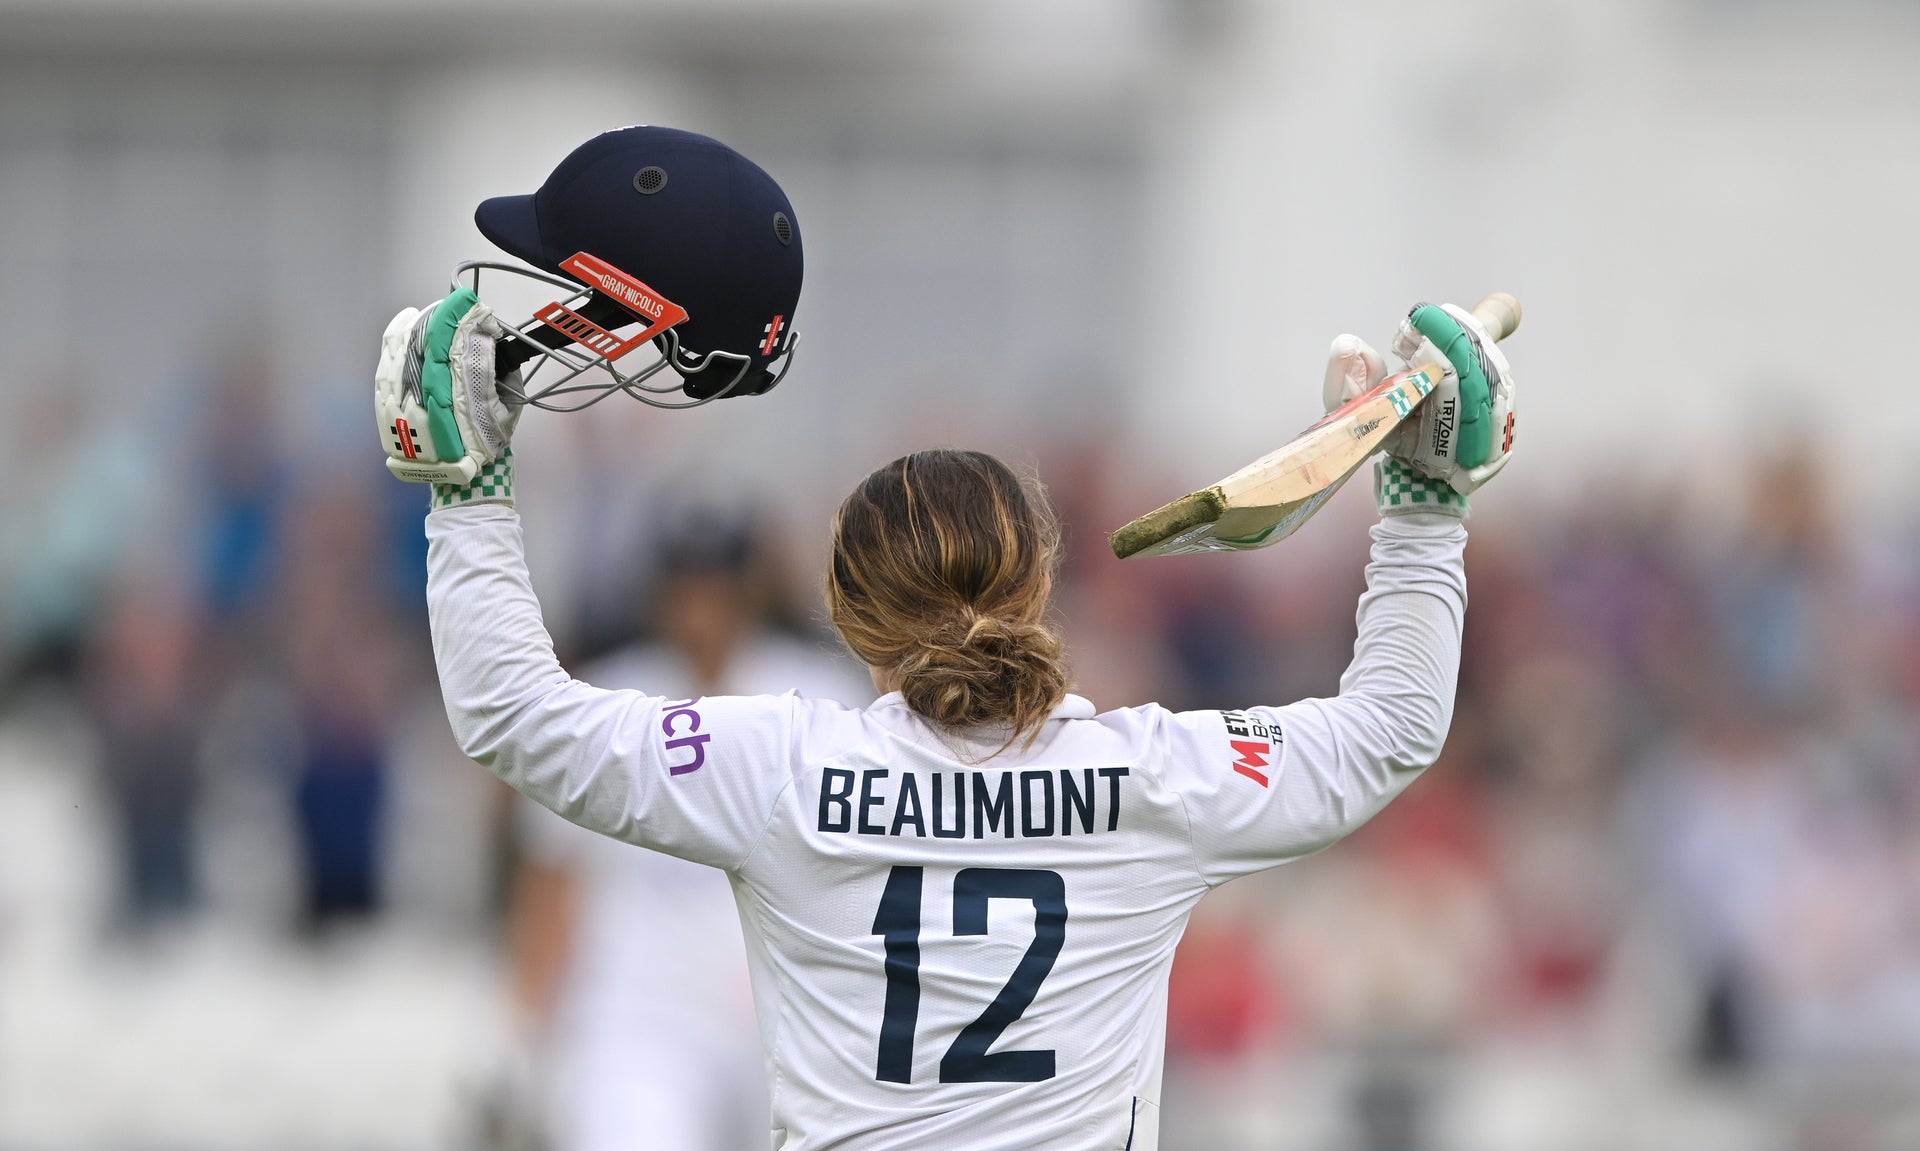 Tammy Beaumont Collection